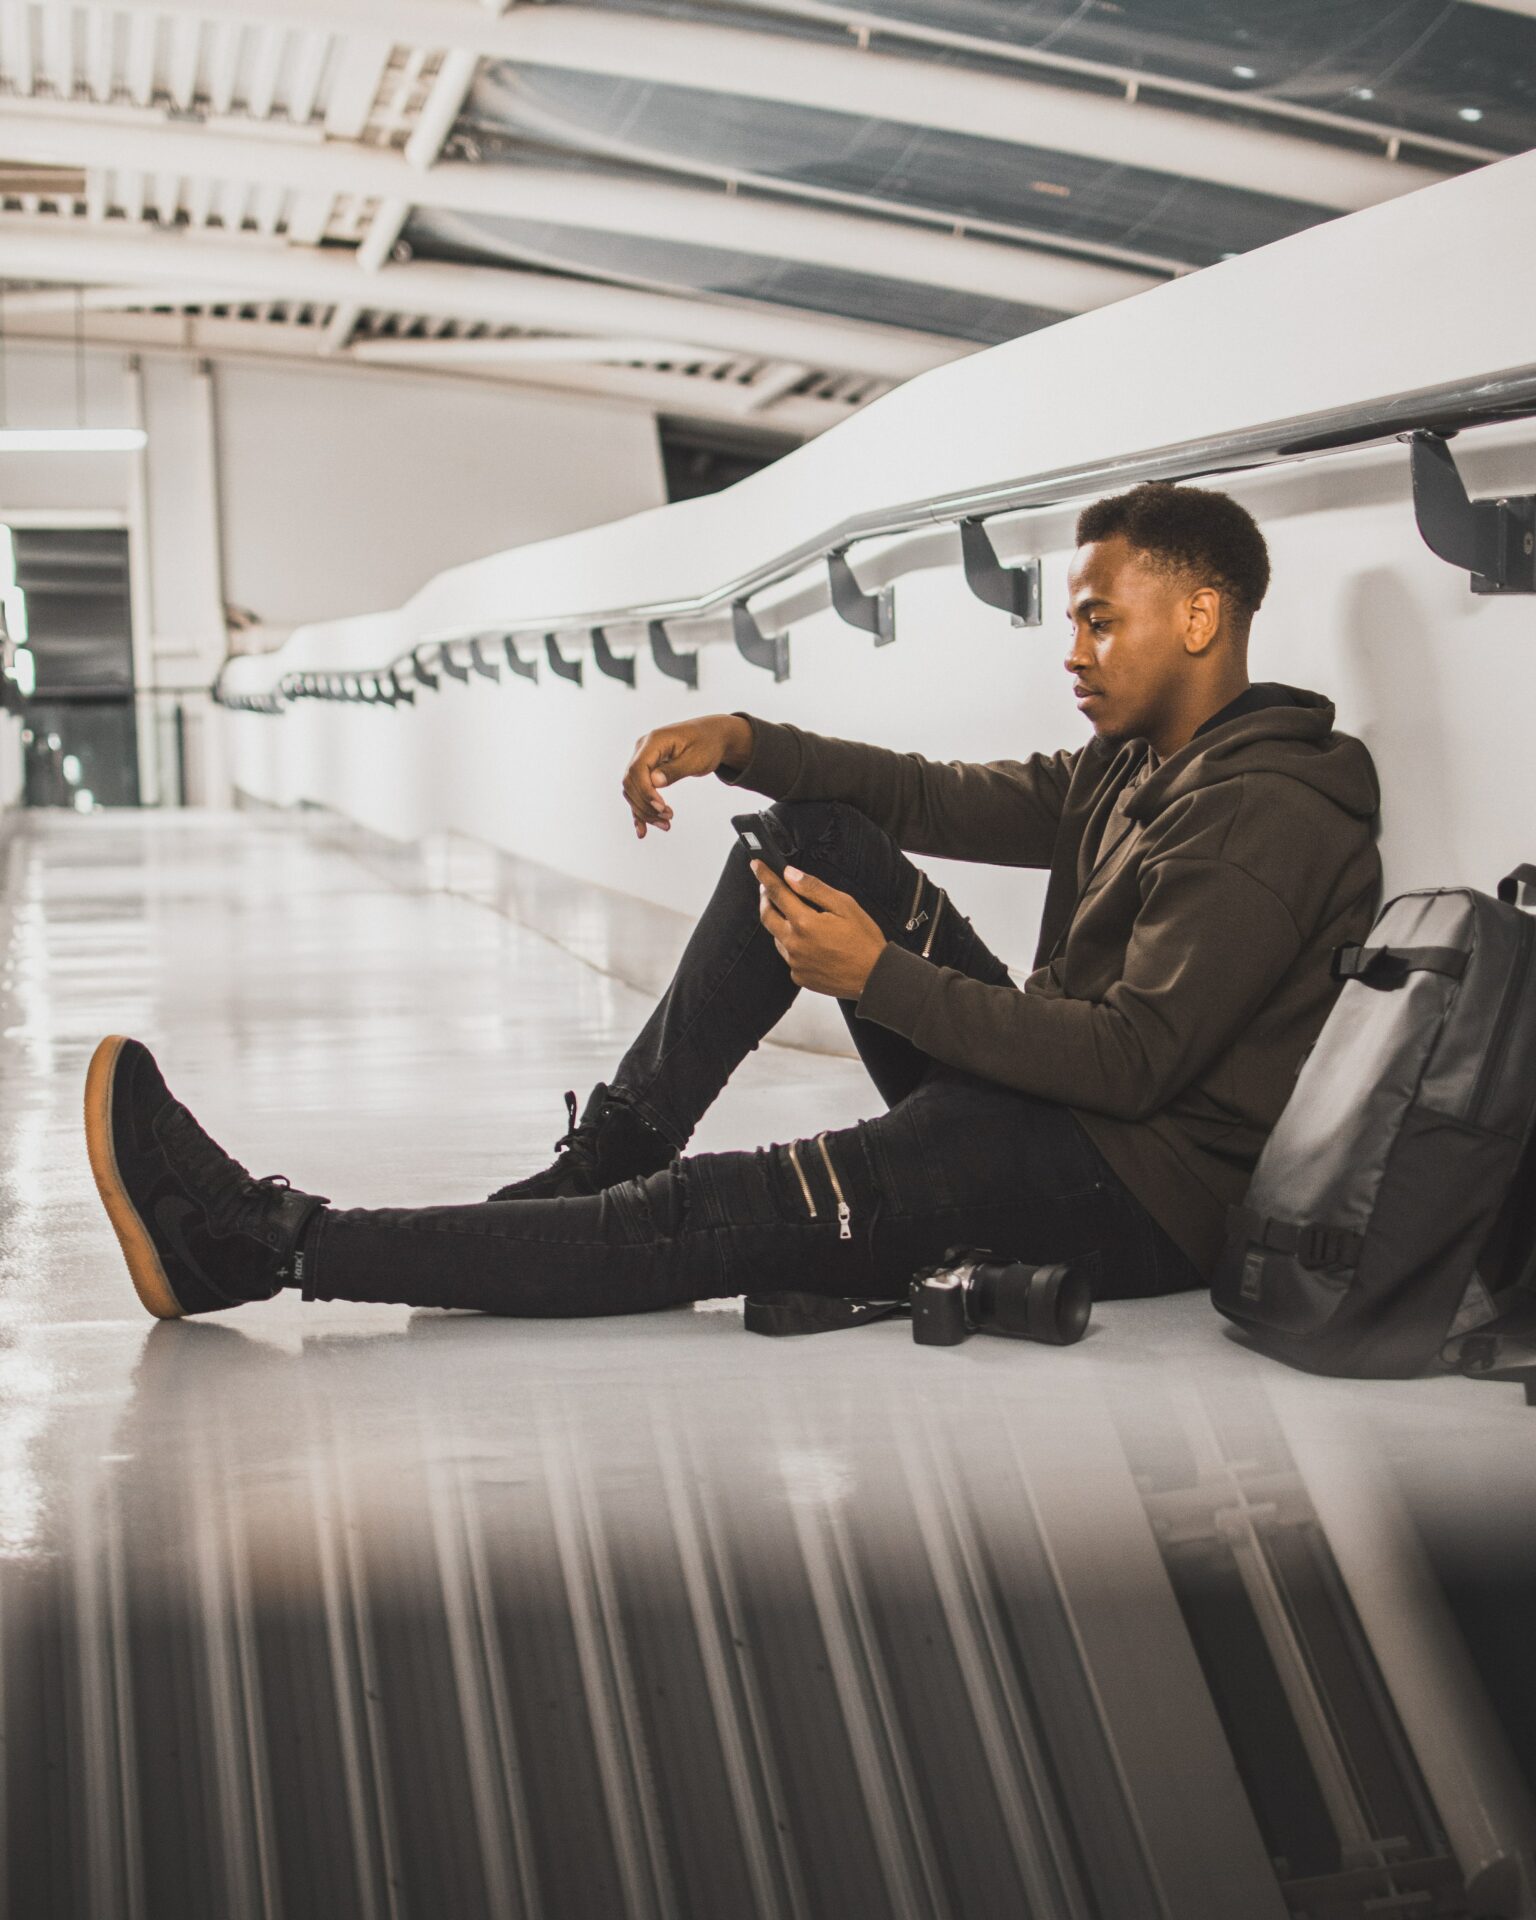 Airport Live Streaming: Why It Makes Business Sense